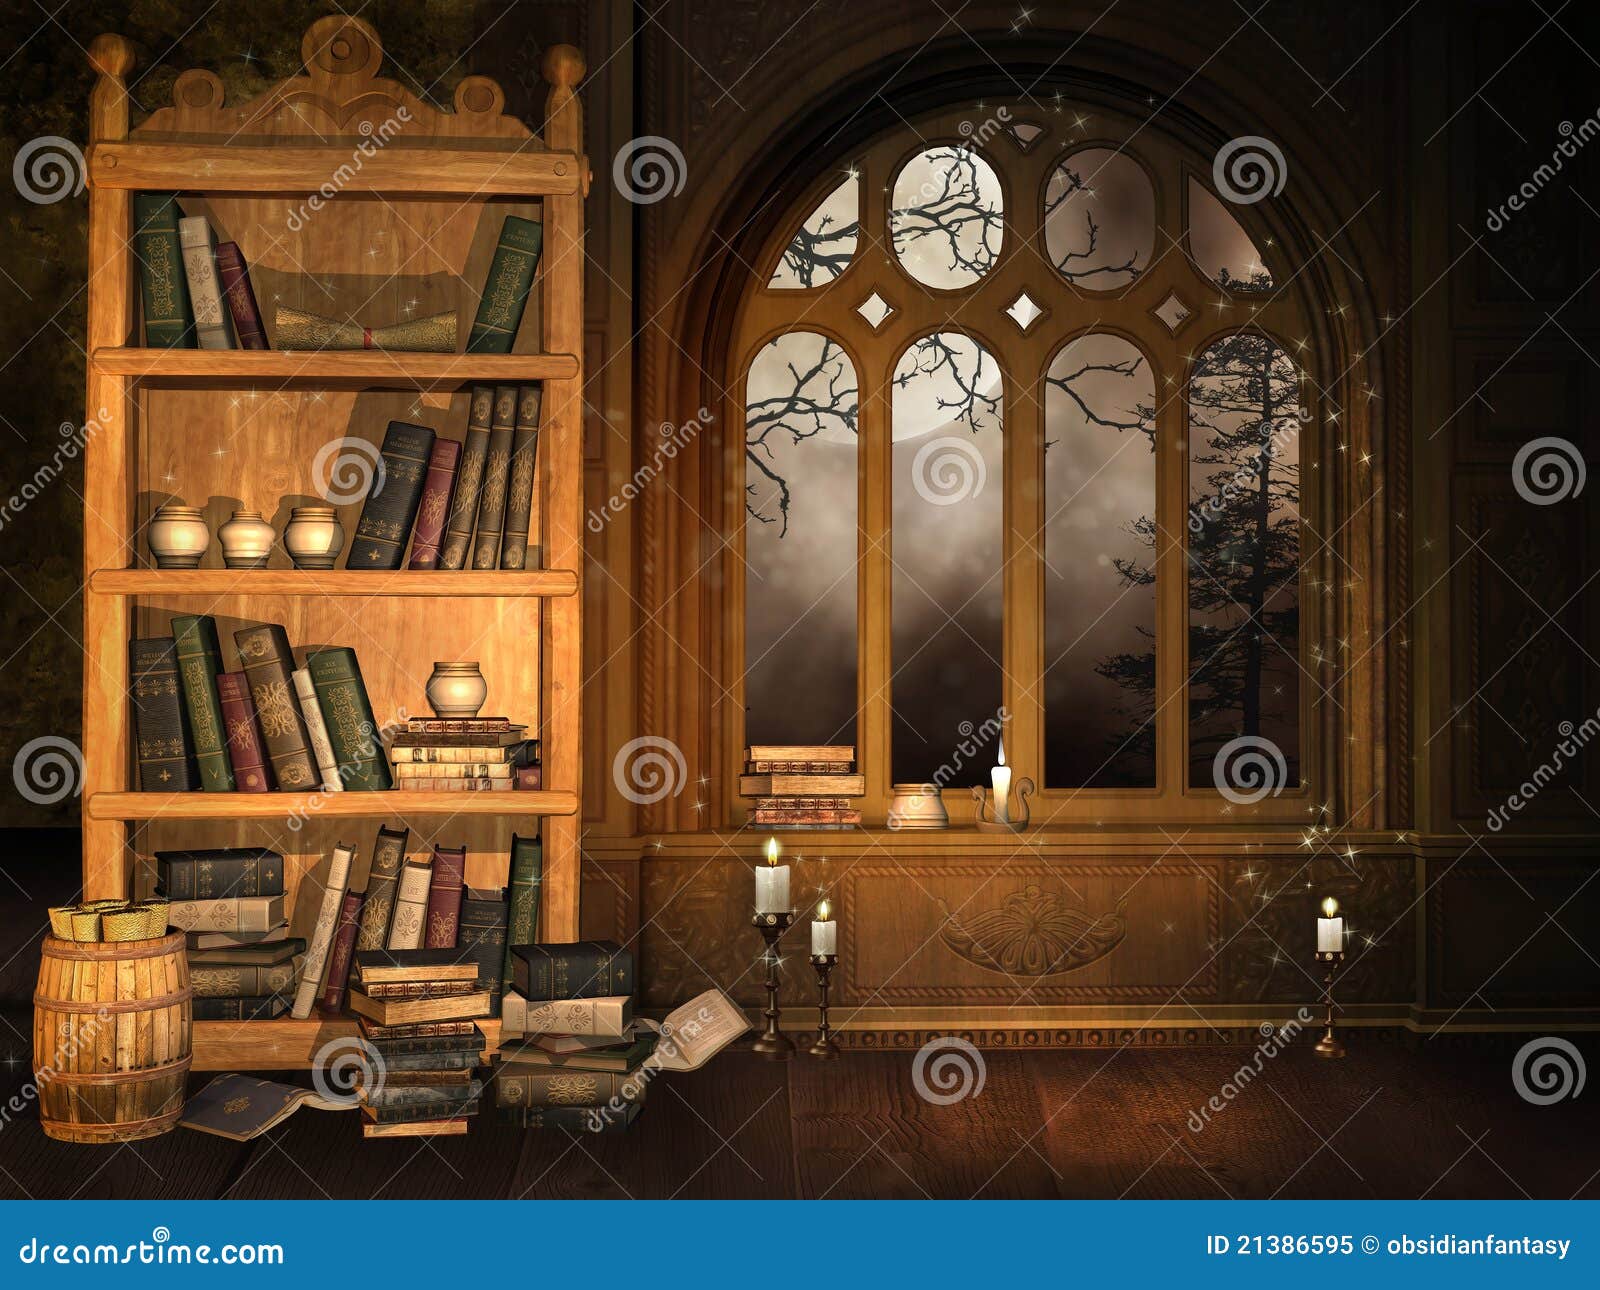 wizard's library